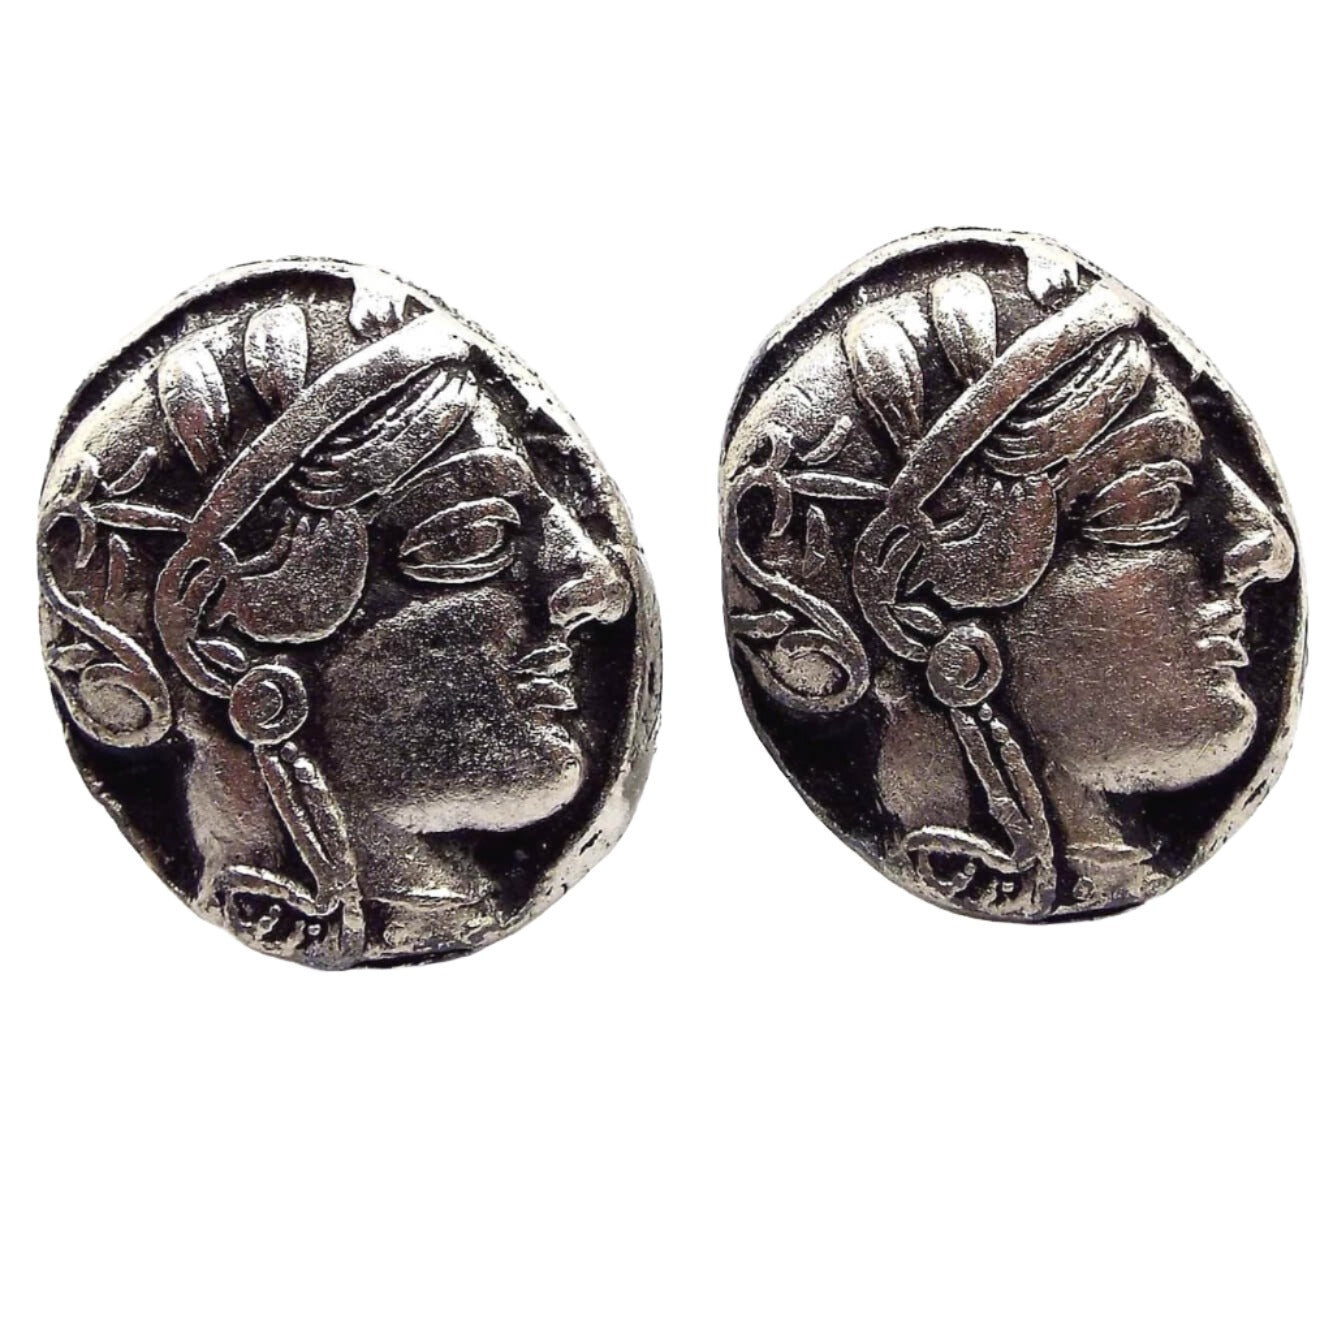 Front view of the retro vintage Athena Front Owl Back Greek Athens Tetradrachm Coin cufflinks. They are oval and antiqued silver tone in color. It has a depiction of Athena on the front.